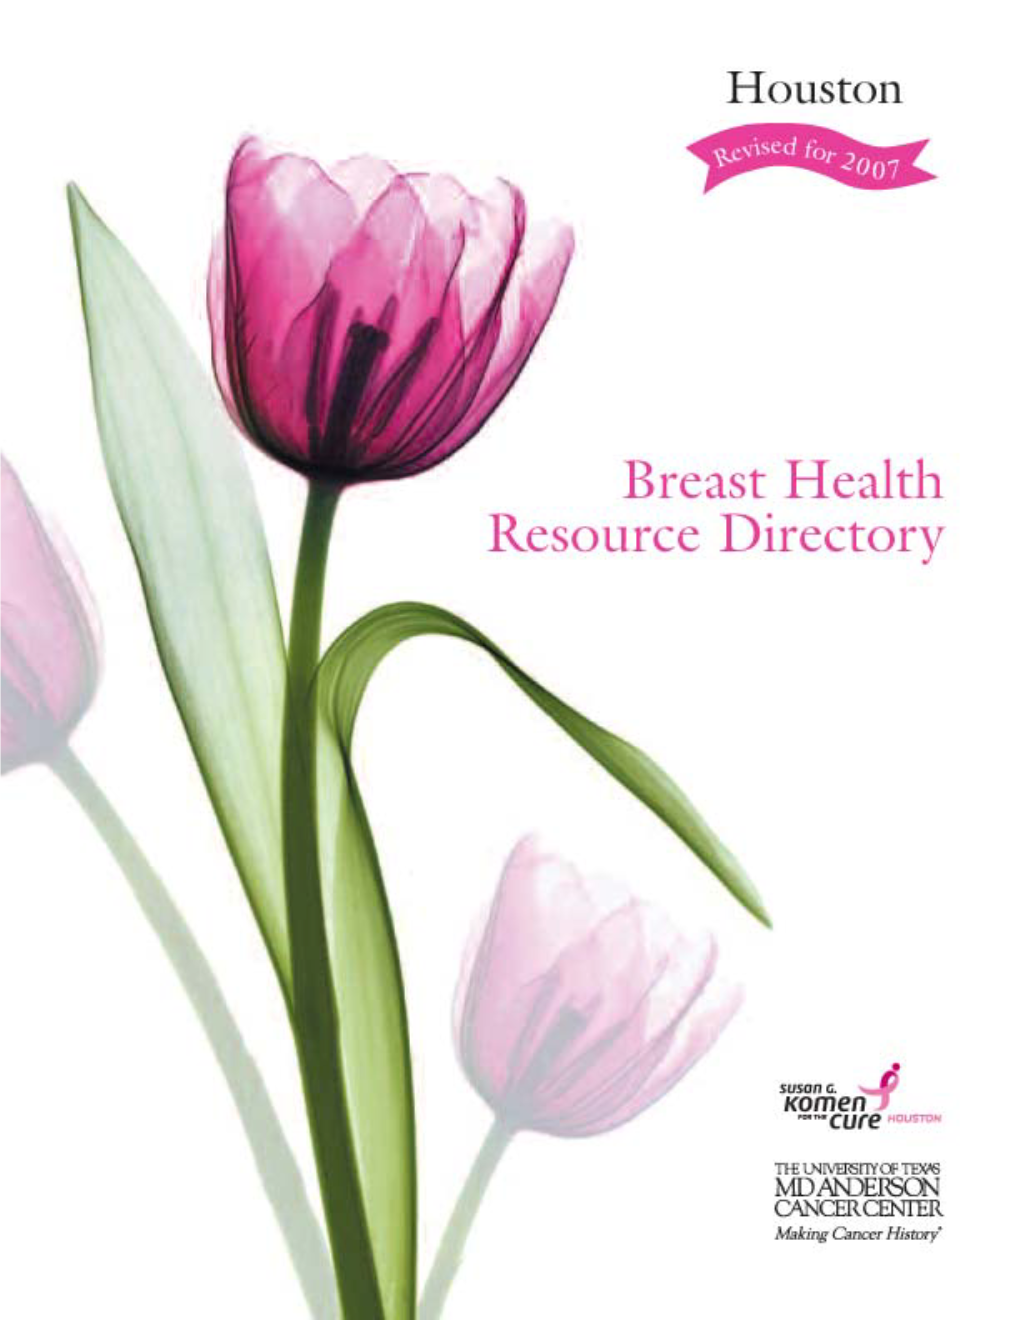 Breast Reconstruction Page 86 Clinical Trials Page 89 Complementary and Integrative Medicine Page 91